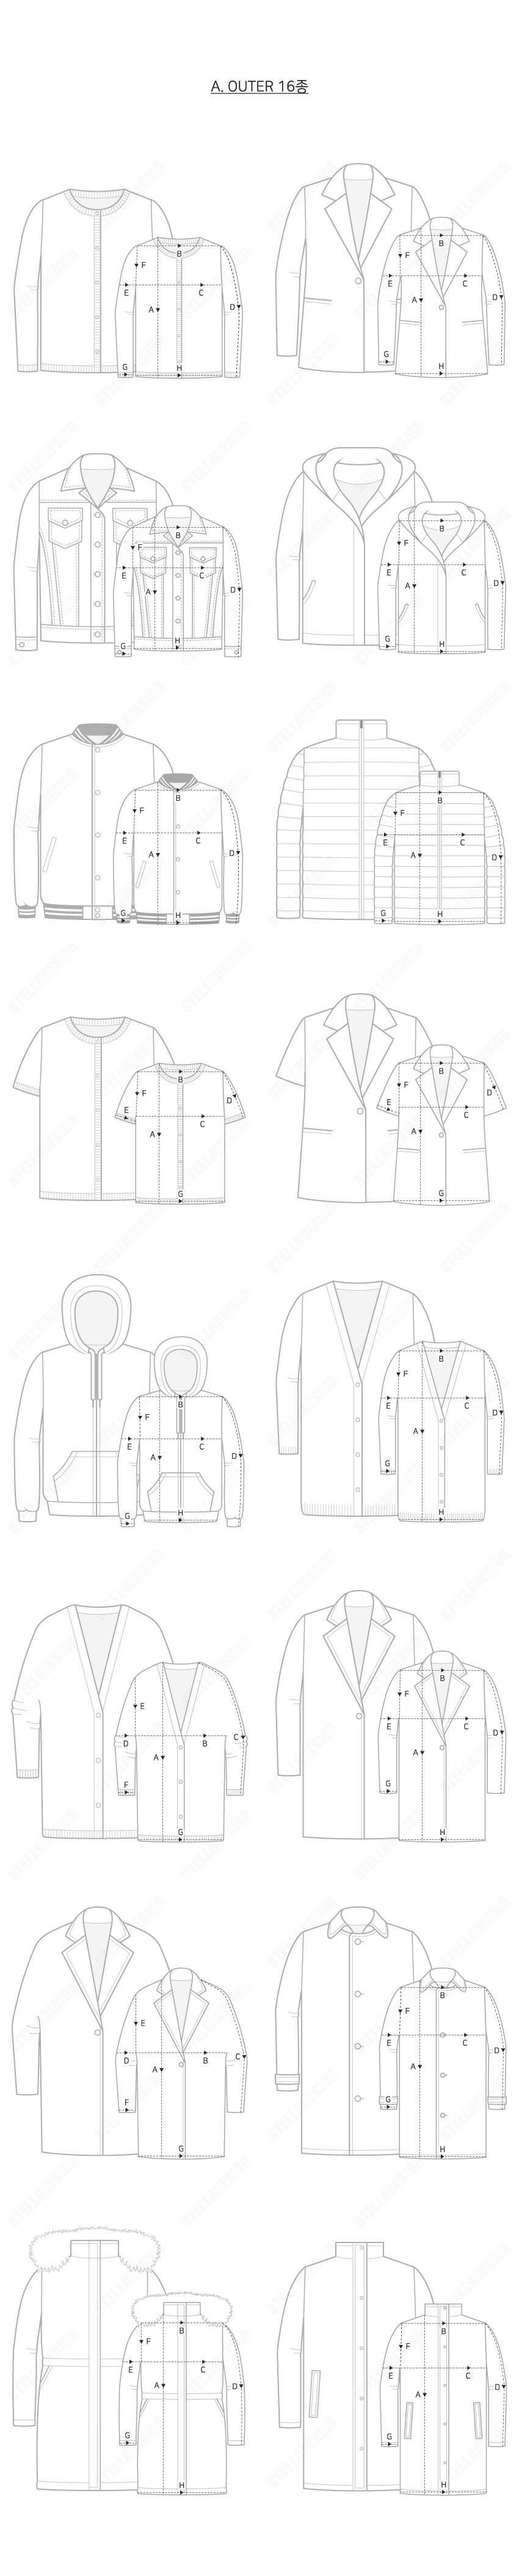 ss129-02-outer